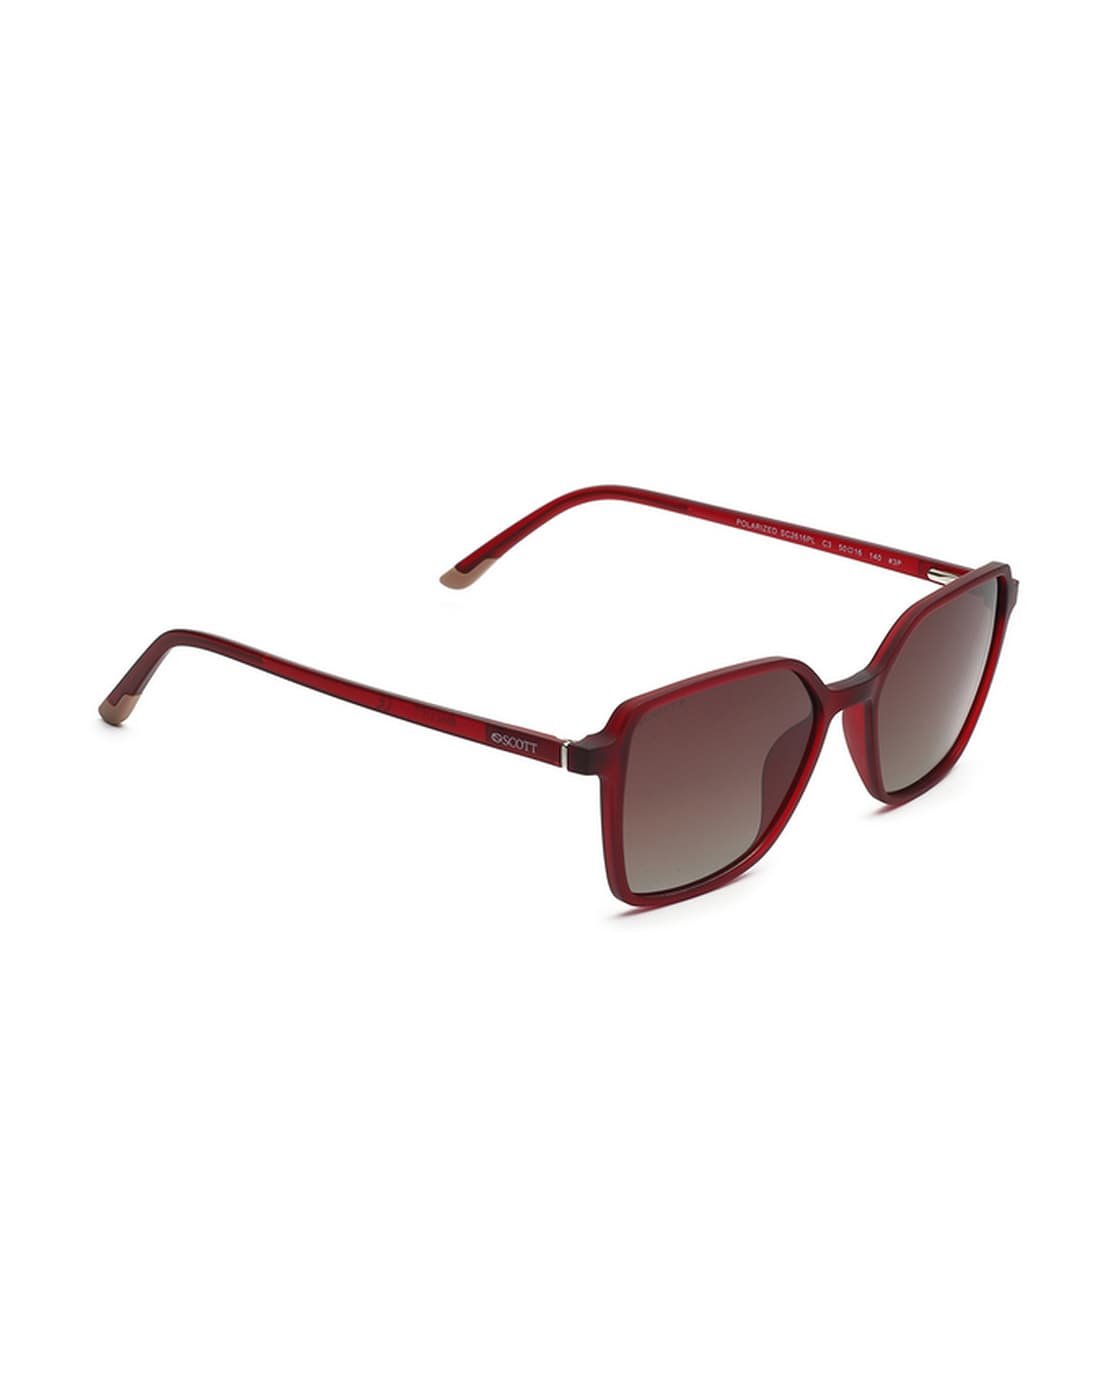 Buy scott sunglasses men in India @ Limeroad | page 4